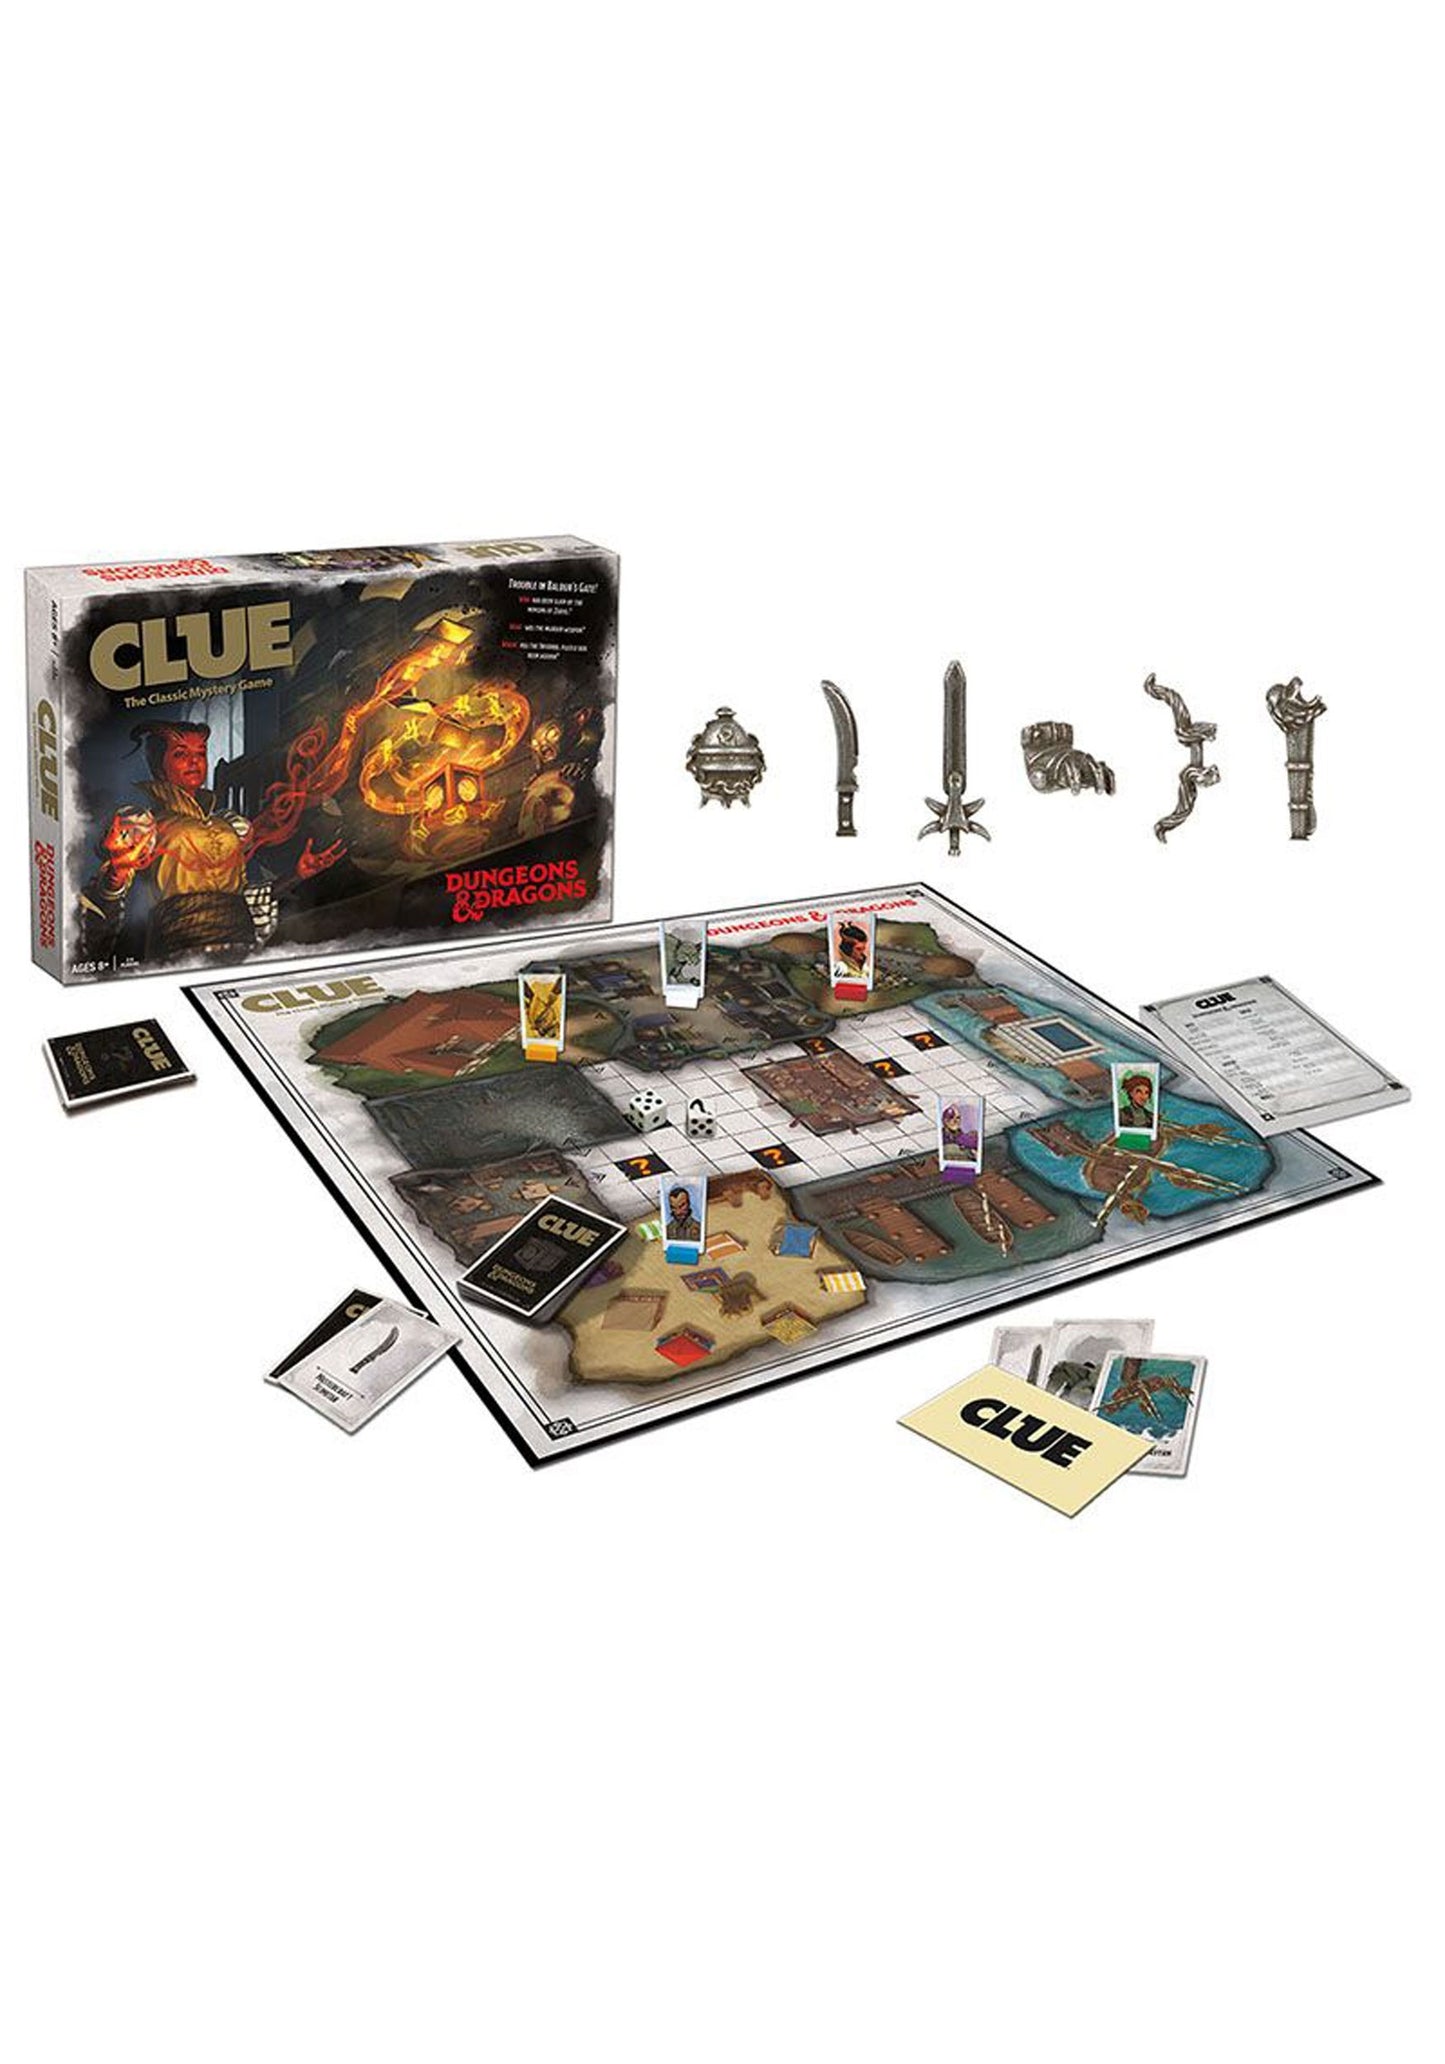 Dungeons & Dragons Clue Game